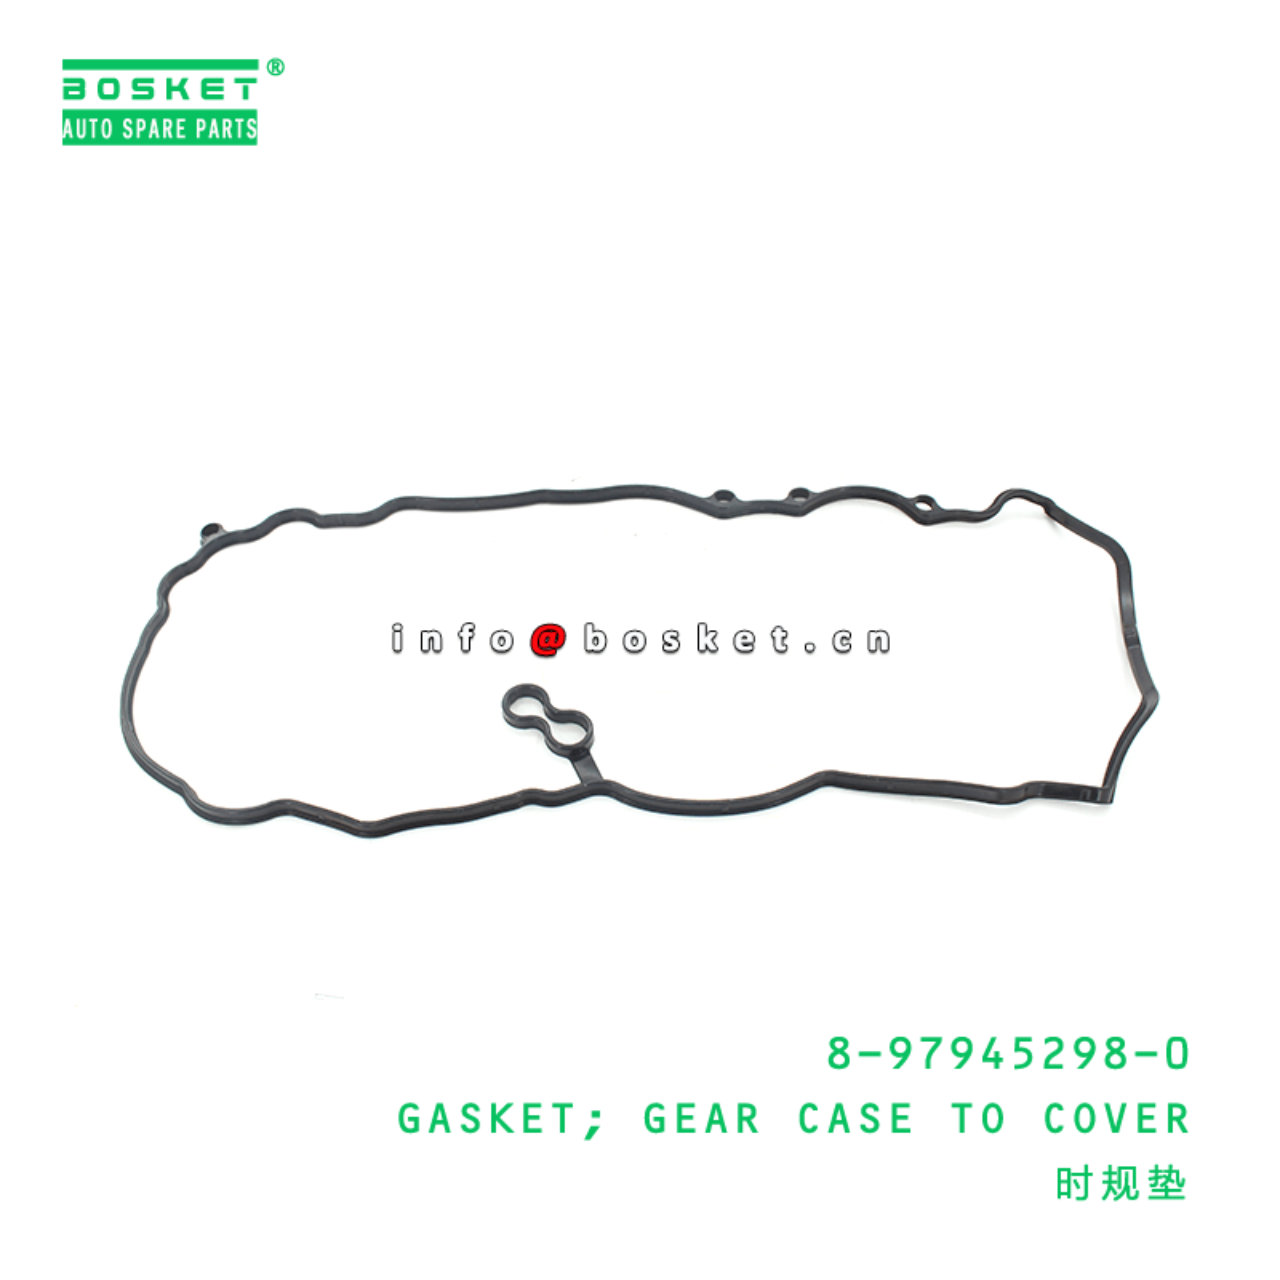 8-97945298-0 Gear Case To Cover Gasket 8979452980 Suitable for ISUZU TFR 4JJ1 